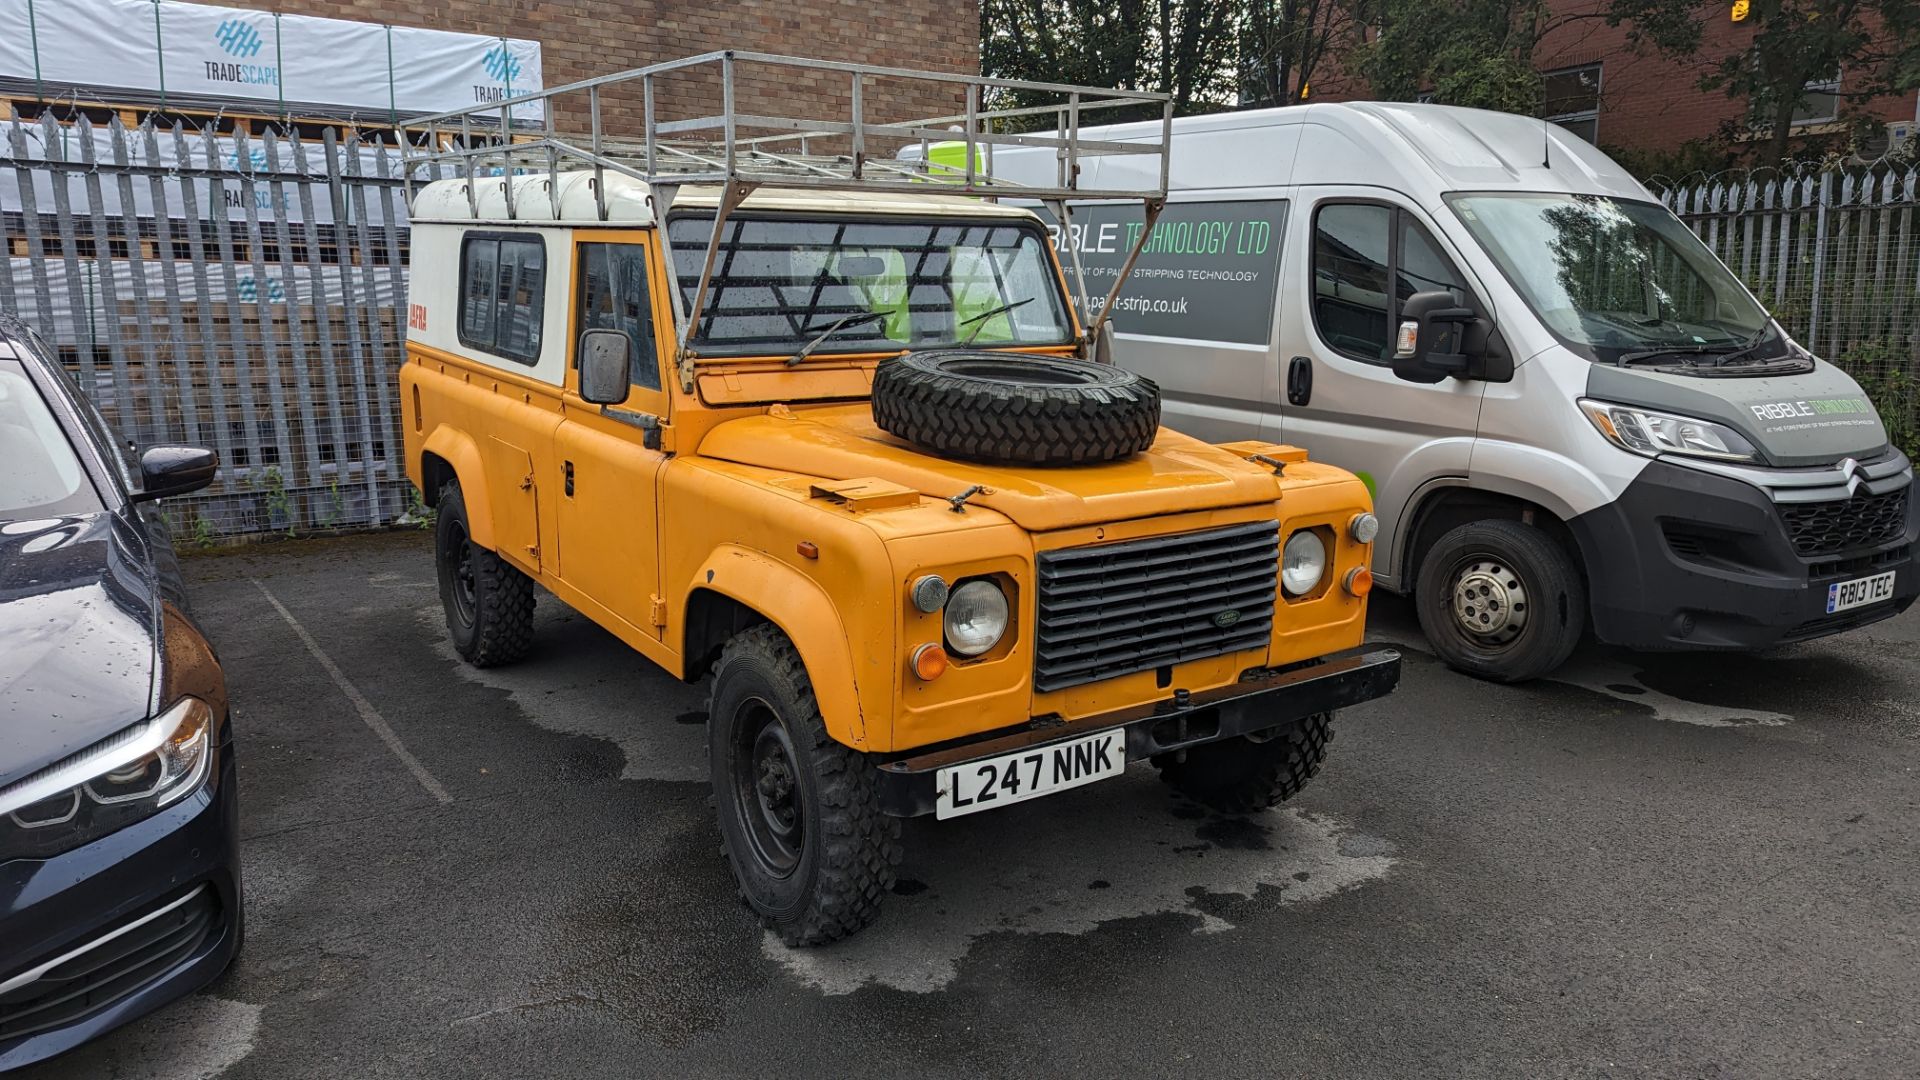 2003 Land Rover 110 Defender 4C Diesel with wood fired pizza oven